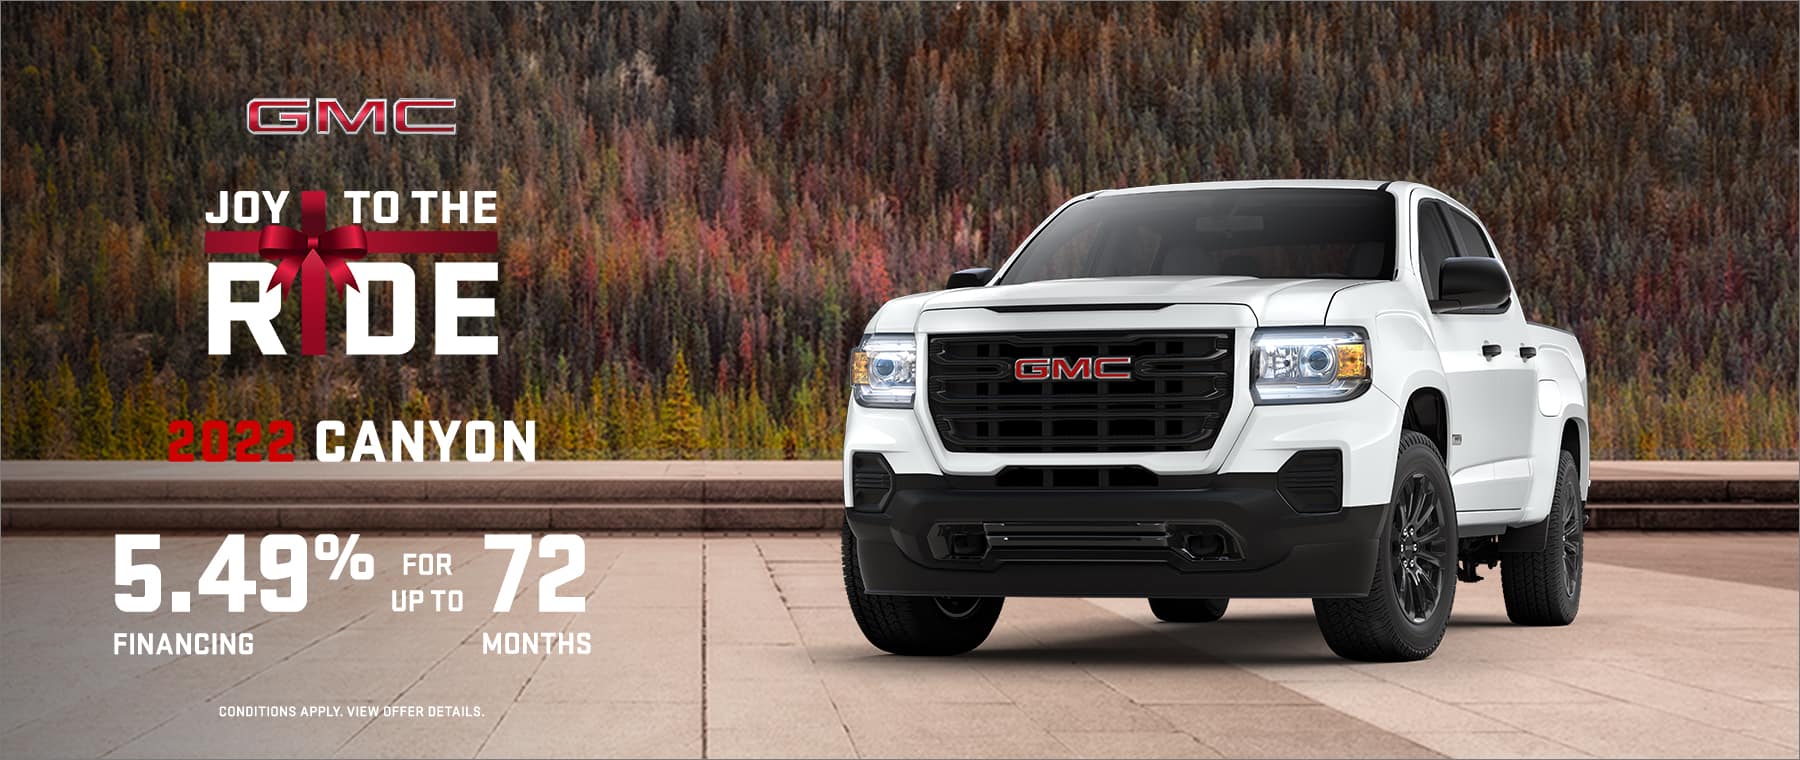 Get 5.49% financing for up to 72 months on a new 2022 GMC Canyon